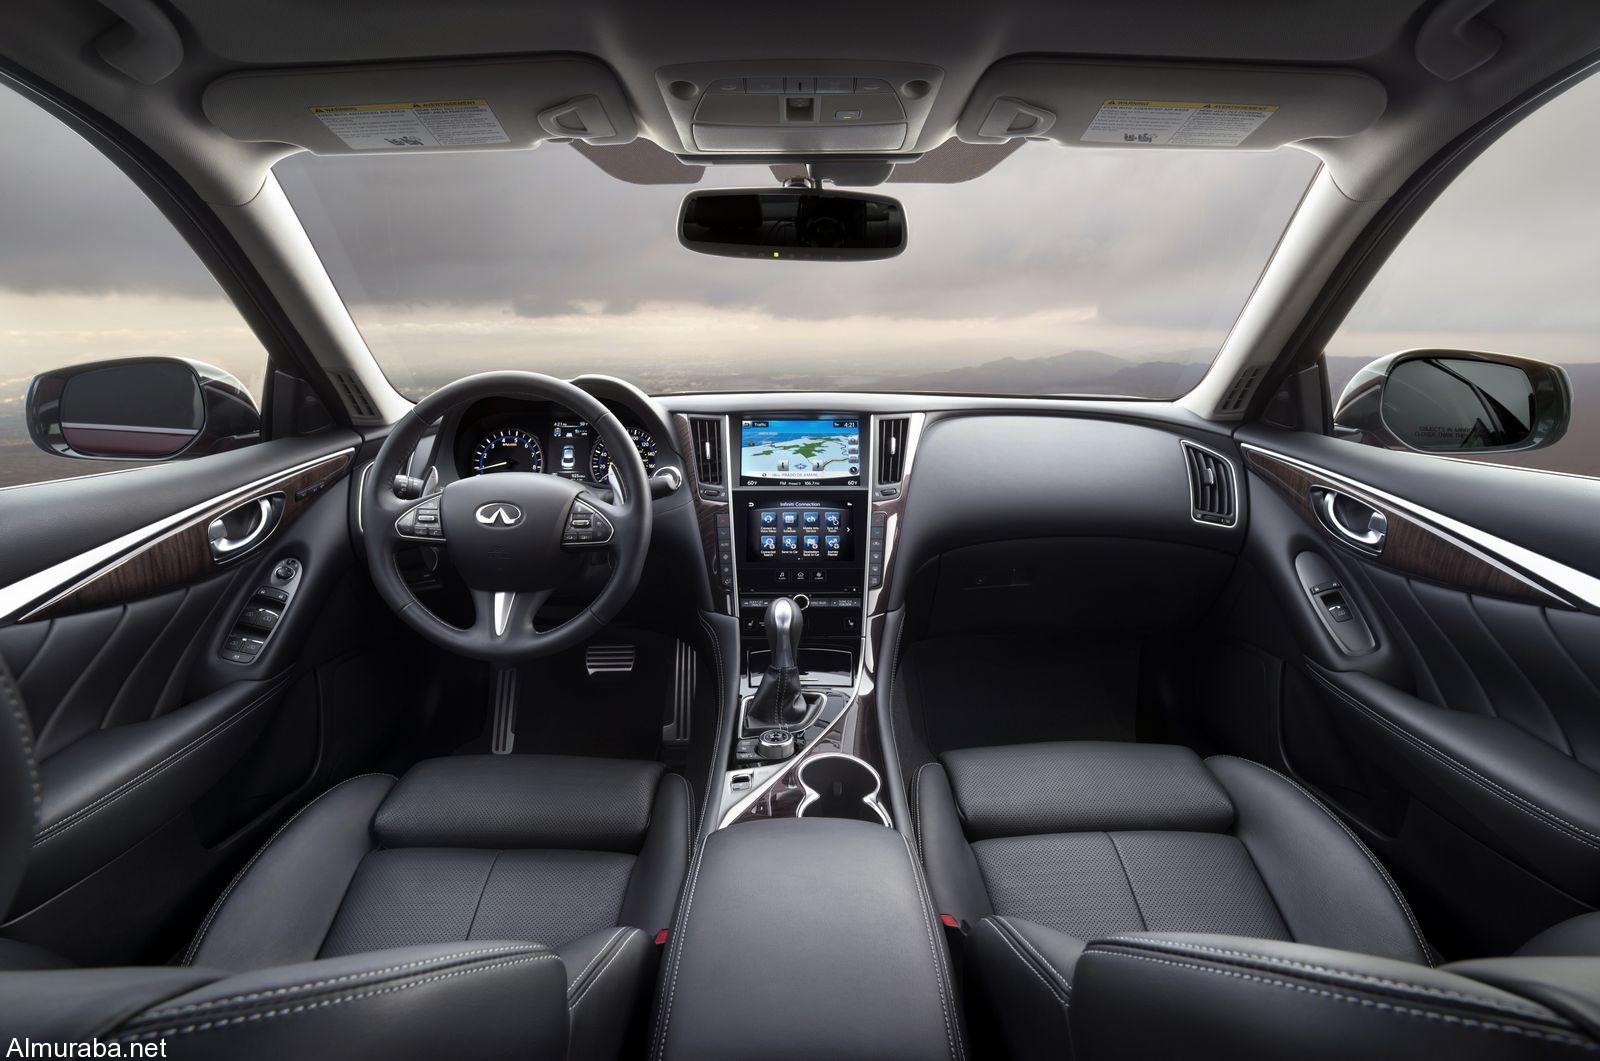 NASHVILLE (Dec. 15, 2016) – Infiniti has comprehensively enhanced its versatile QX60 premium crossover for 2016, introducing a wide range of changes that improve the seven-seater’s exterior design and its driving dynamics, while showcasing new features and technologies that improve comfort, convenience and safety.